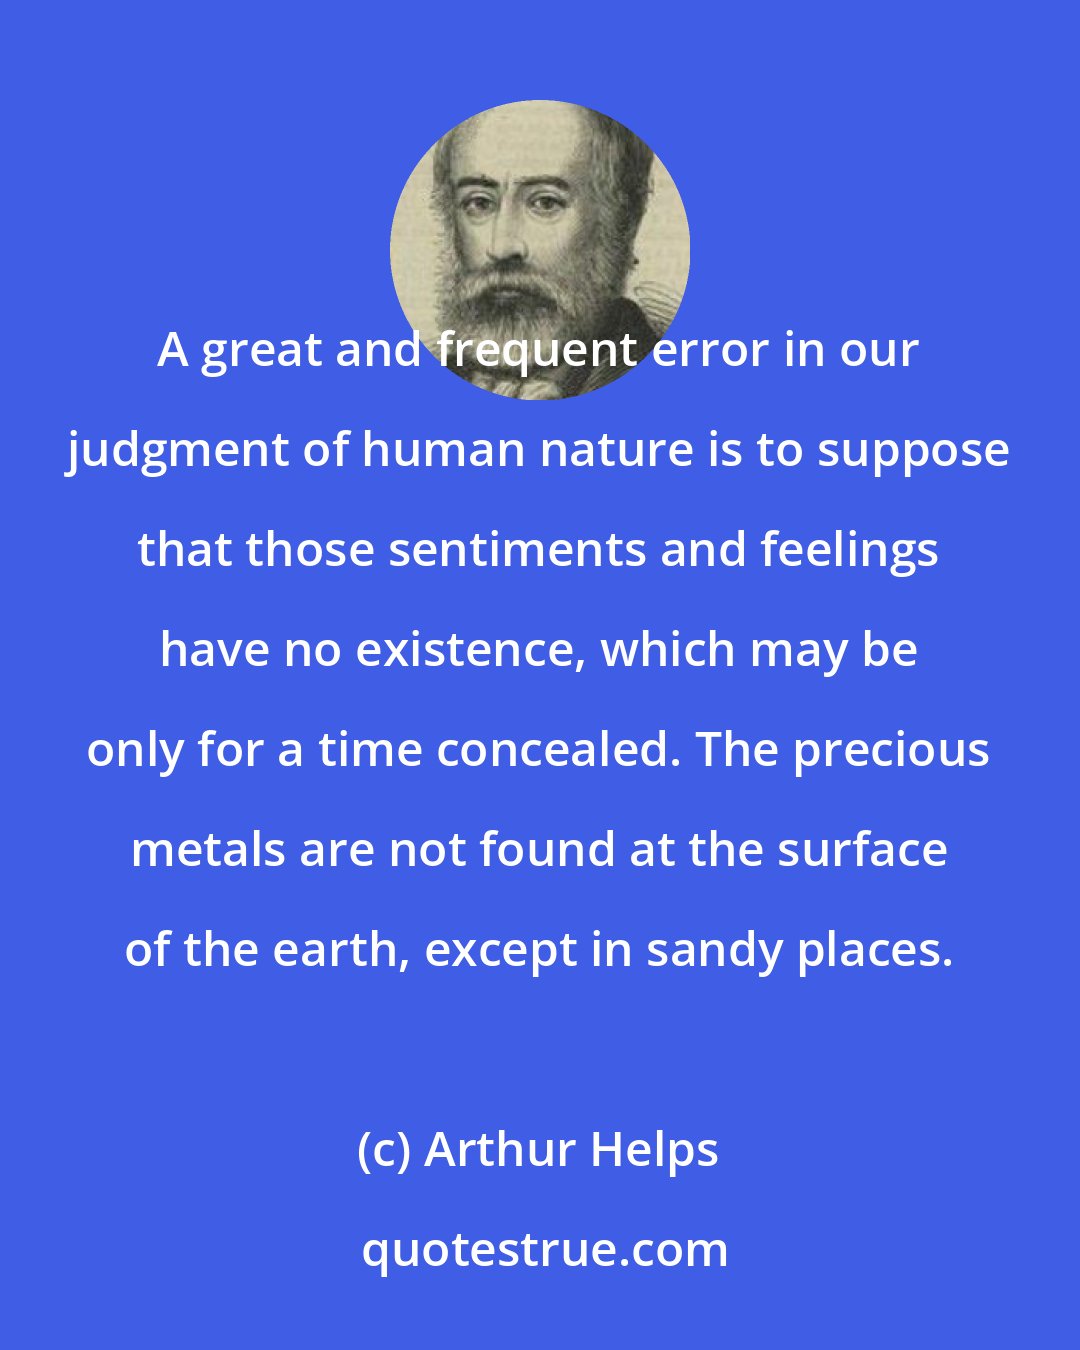 Arthur Helps: A great and frequent error in our judgment of human nature is to suppose that those sentiments and feelings have no existence, which may be only for a time concealed. The precious metals are not found at the surface of the earth, except in sandy places.